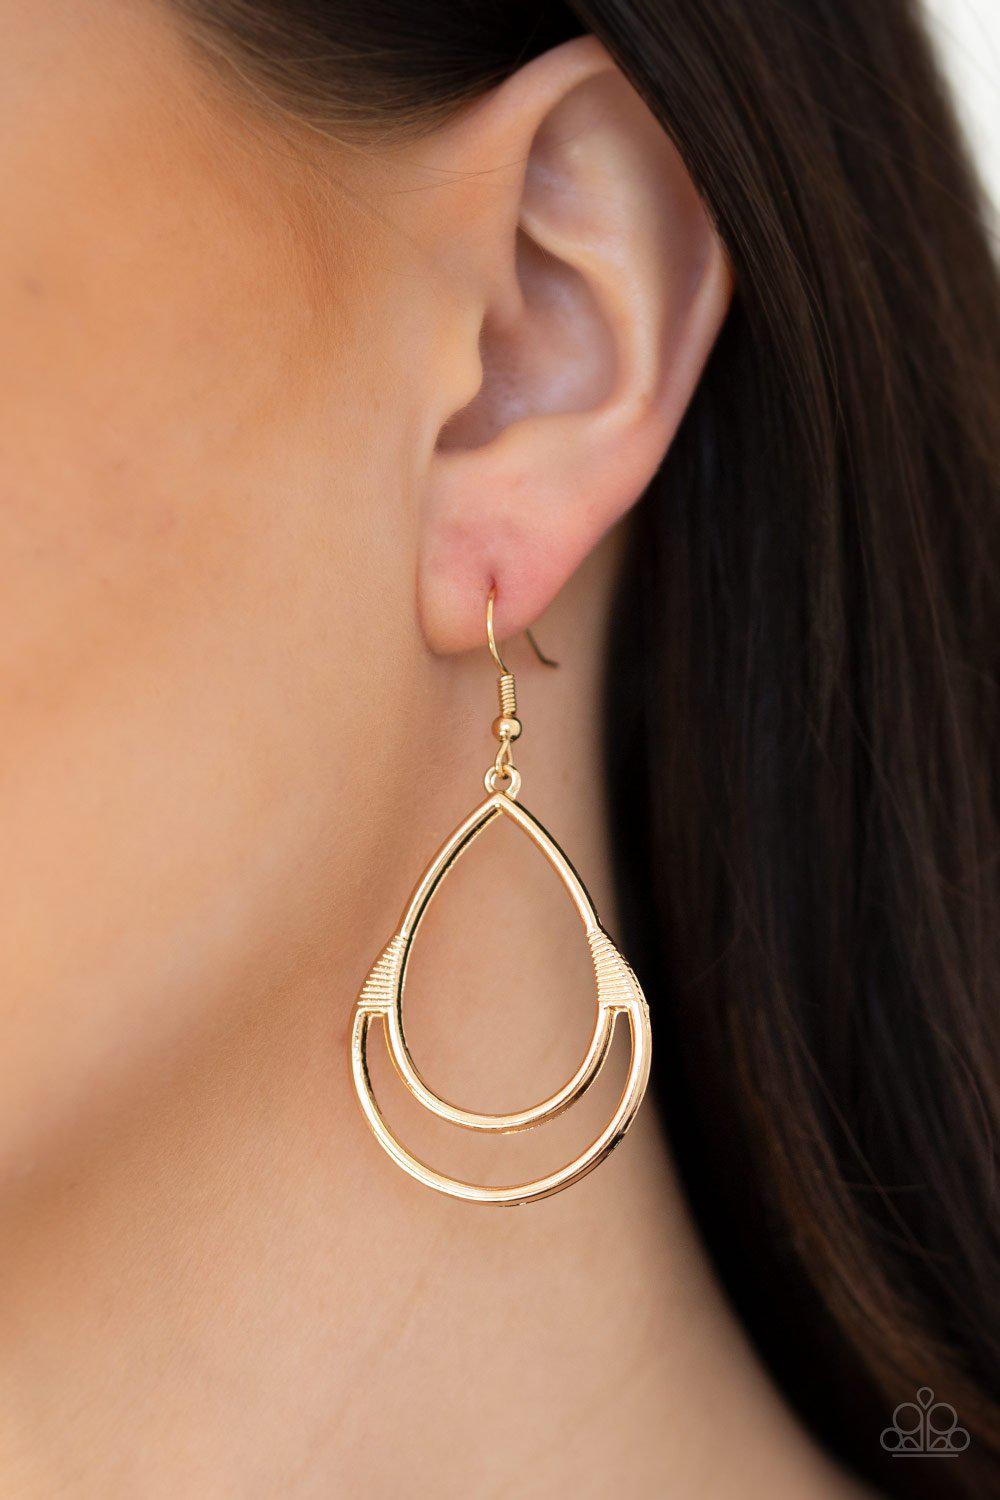 Simple Glisten Gold Earrings - Paparazzi Accessories-CarasShop.com - $5 Jewelry by Cara Jewels